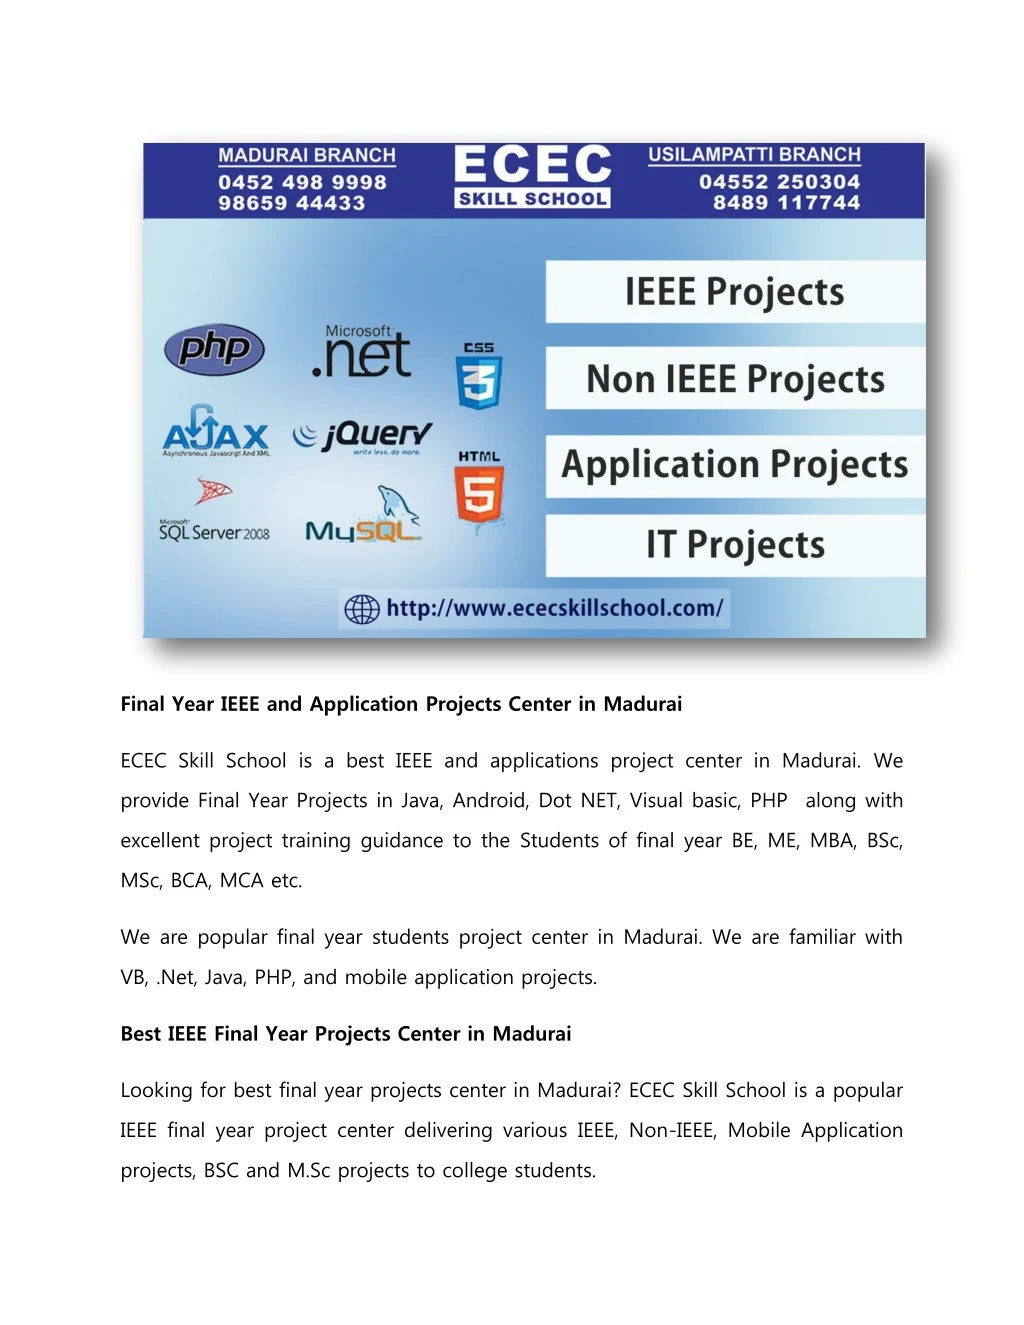 final year ieee and application projects center